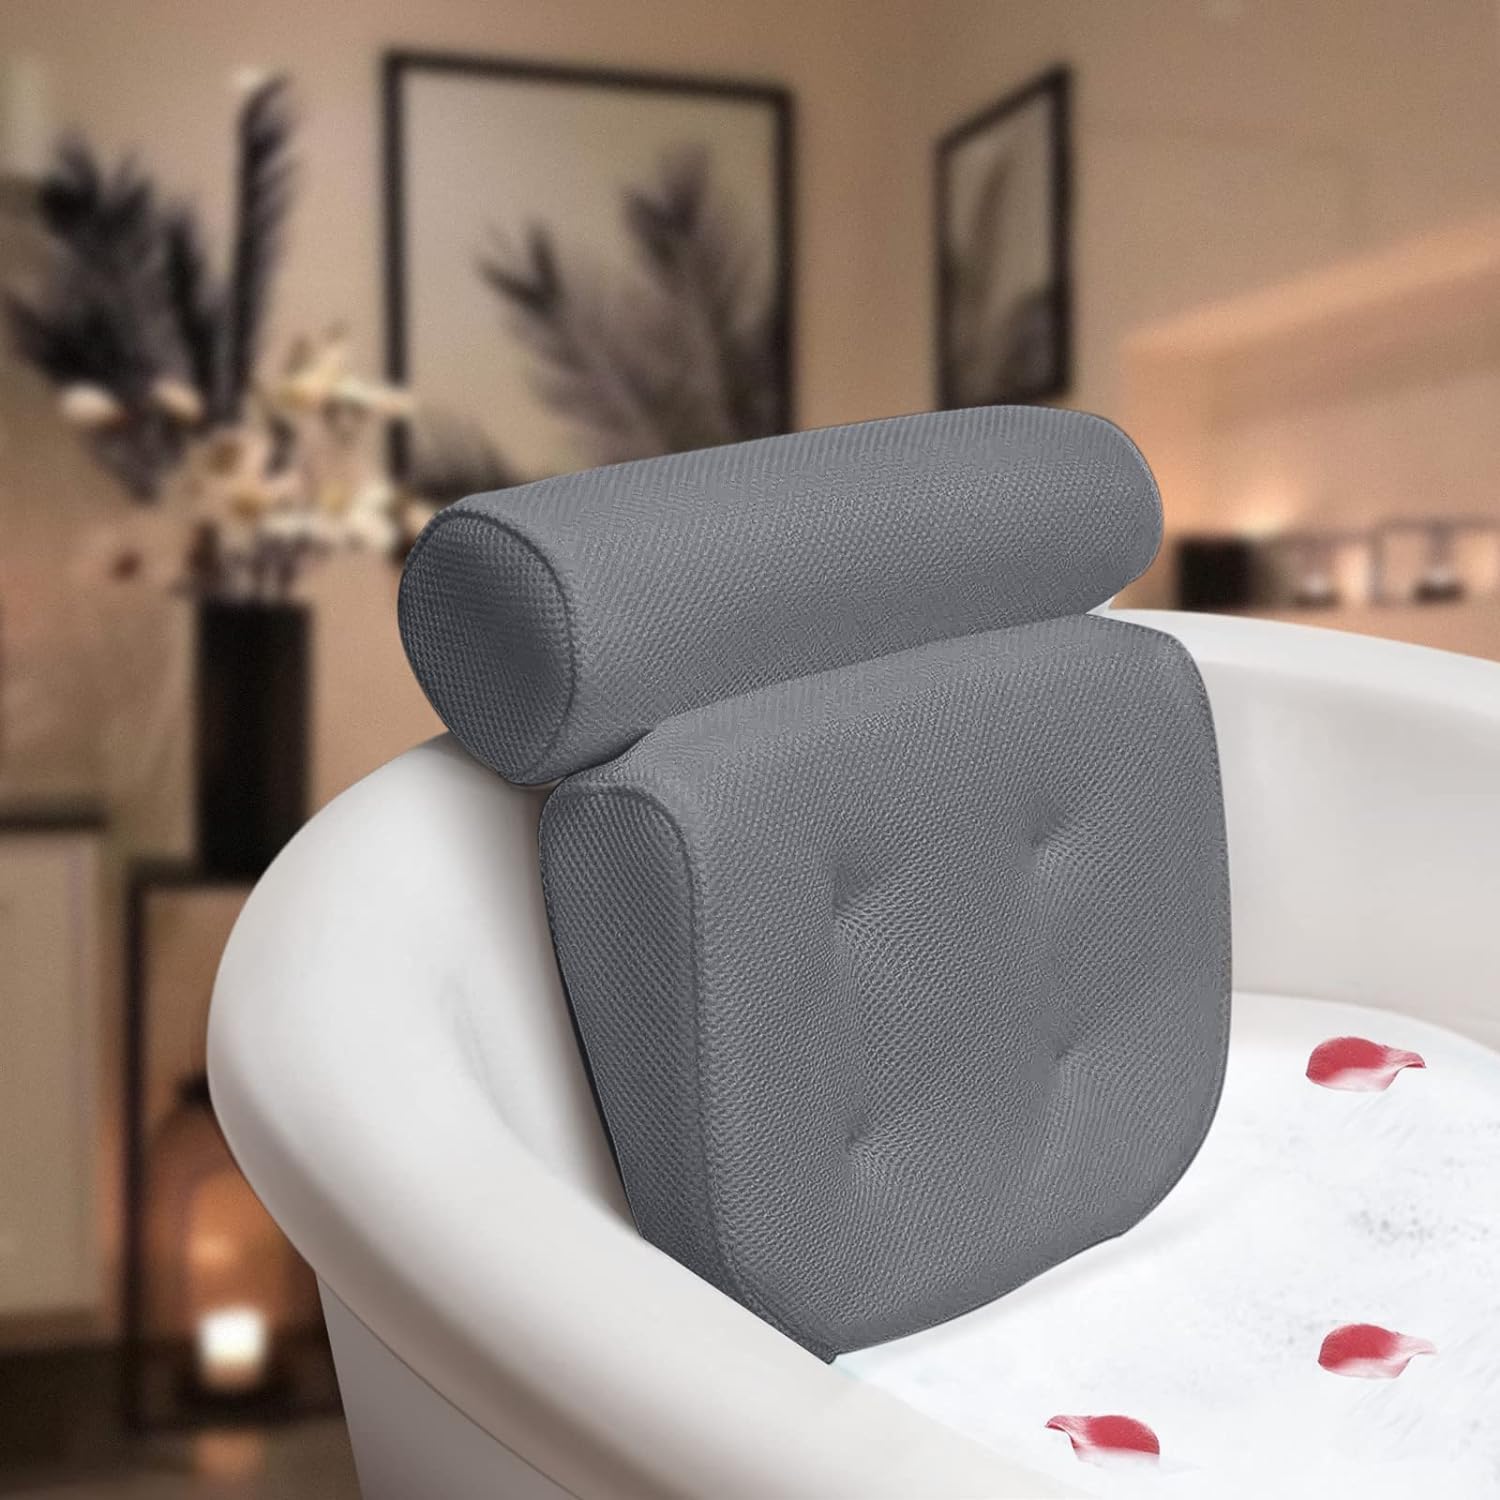 Luxury Bath Pillow for Tub - Non-Slip and Extra-Thick, Head, Neck, Shoulder  and Back Support. Soft and Large Comfort Bathtub Pillow Cushion Headrest  for Relaxation - Fits Any Tub Made of 3D